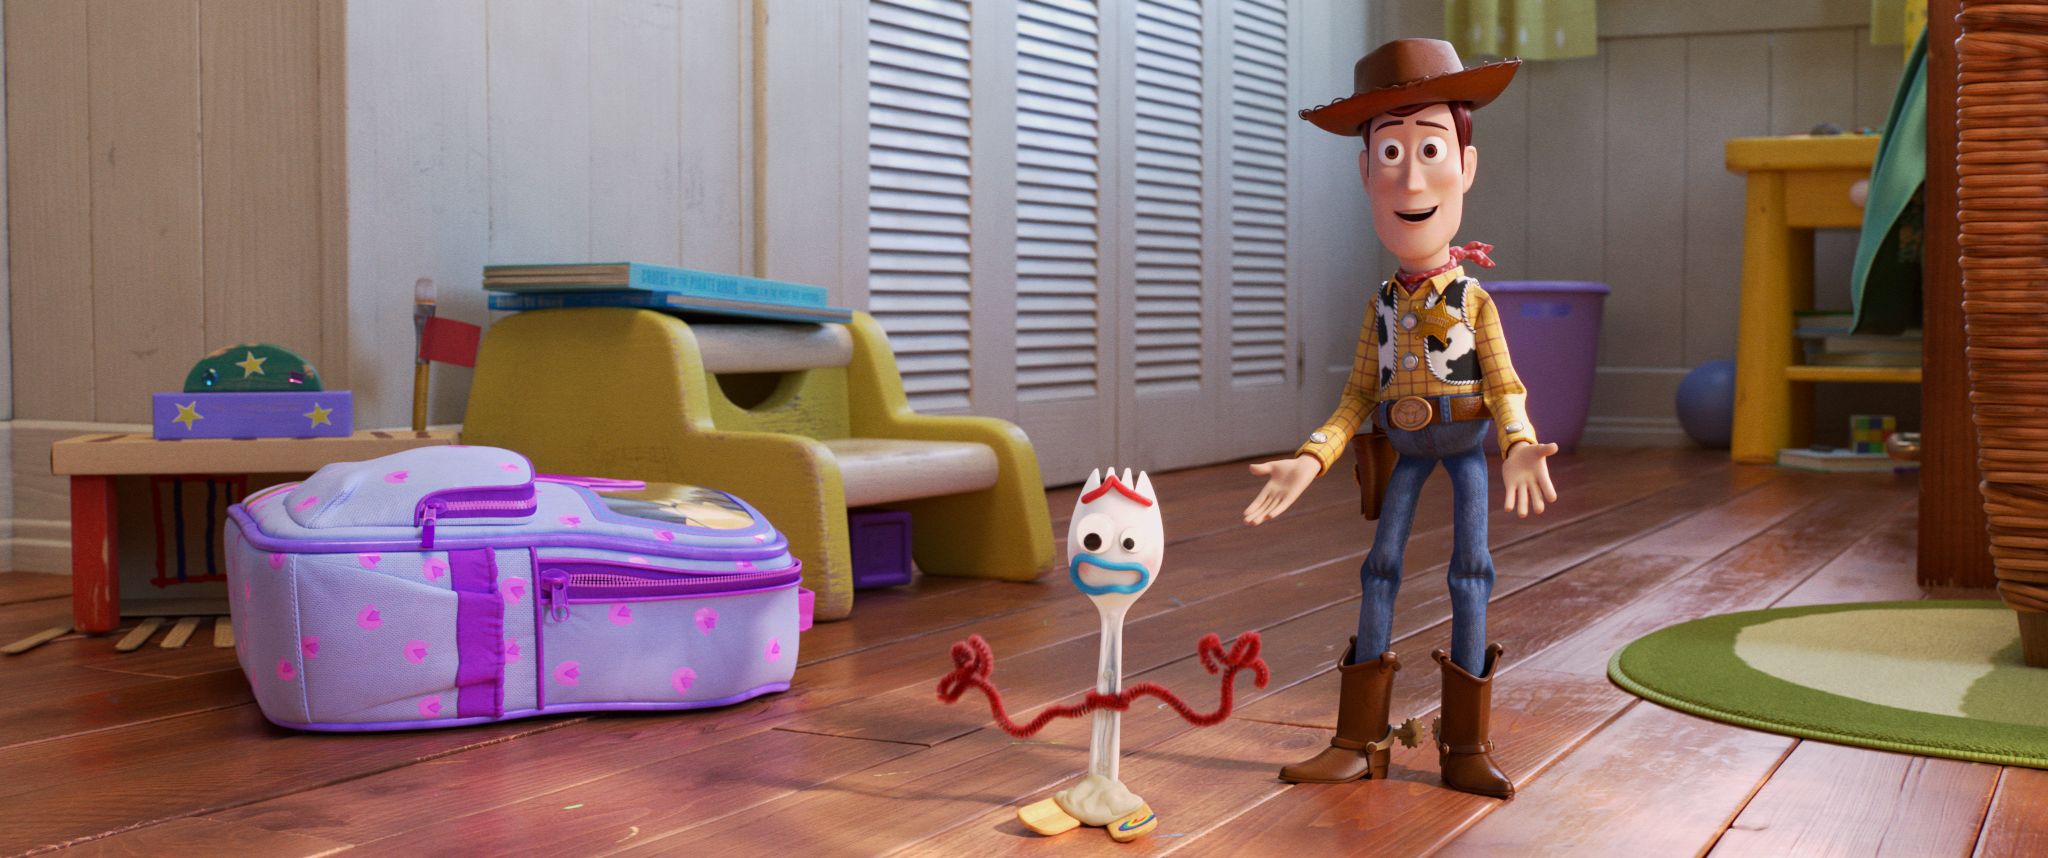 Toy Story 4 Woody and Bo photo